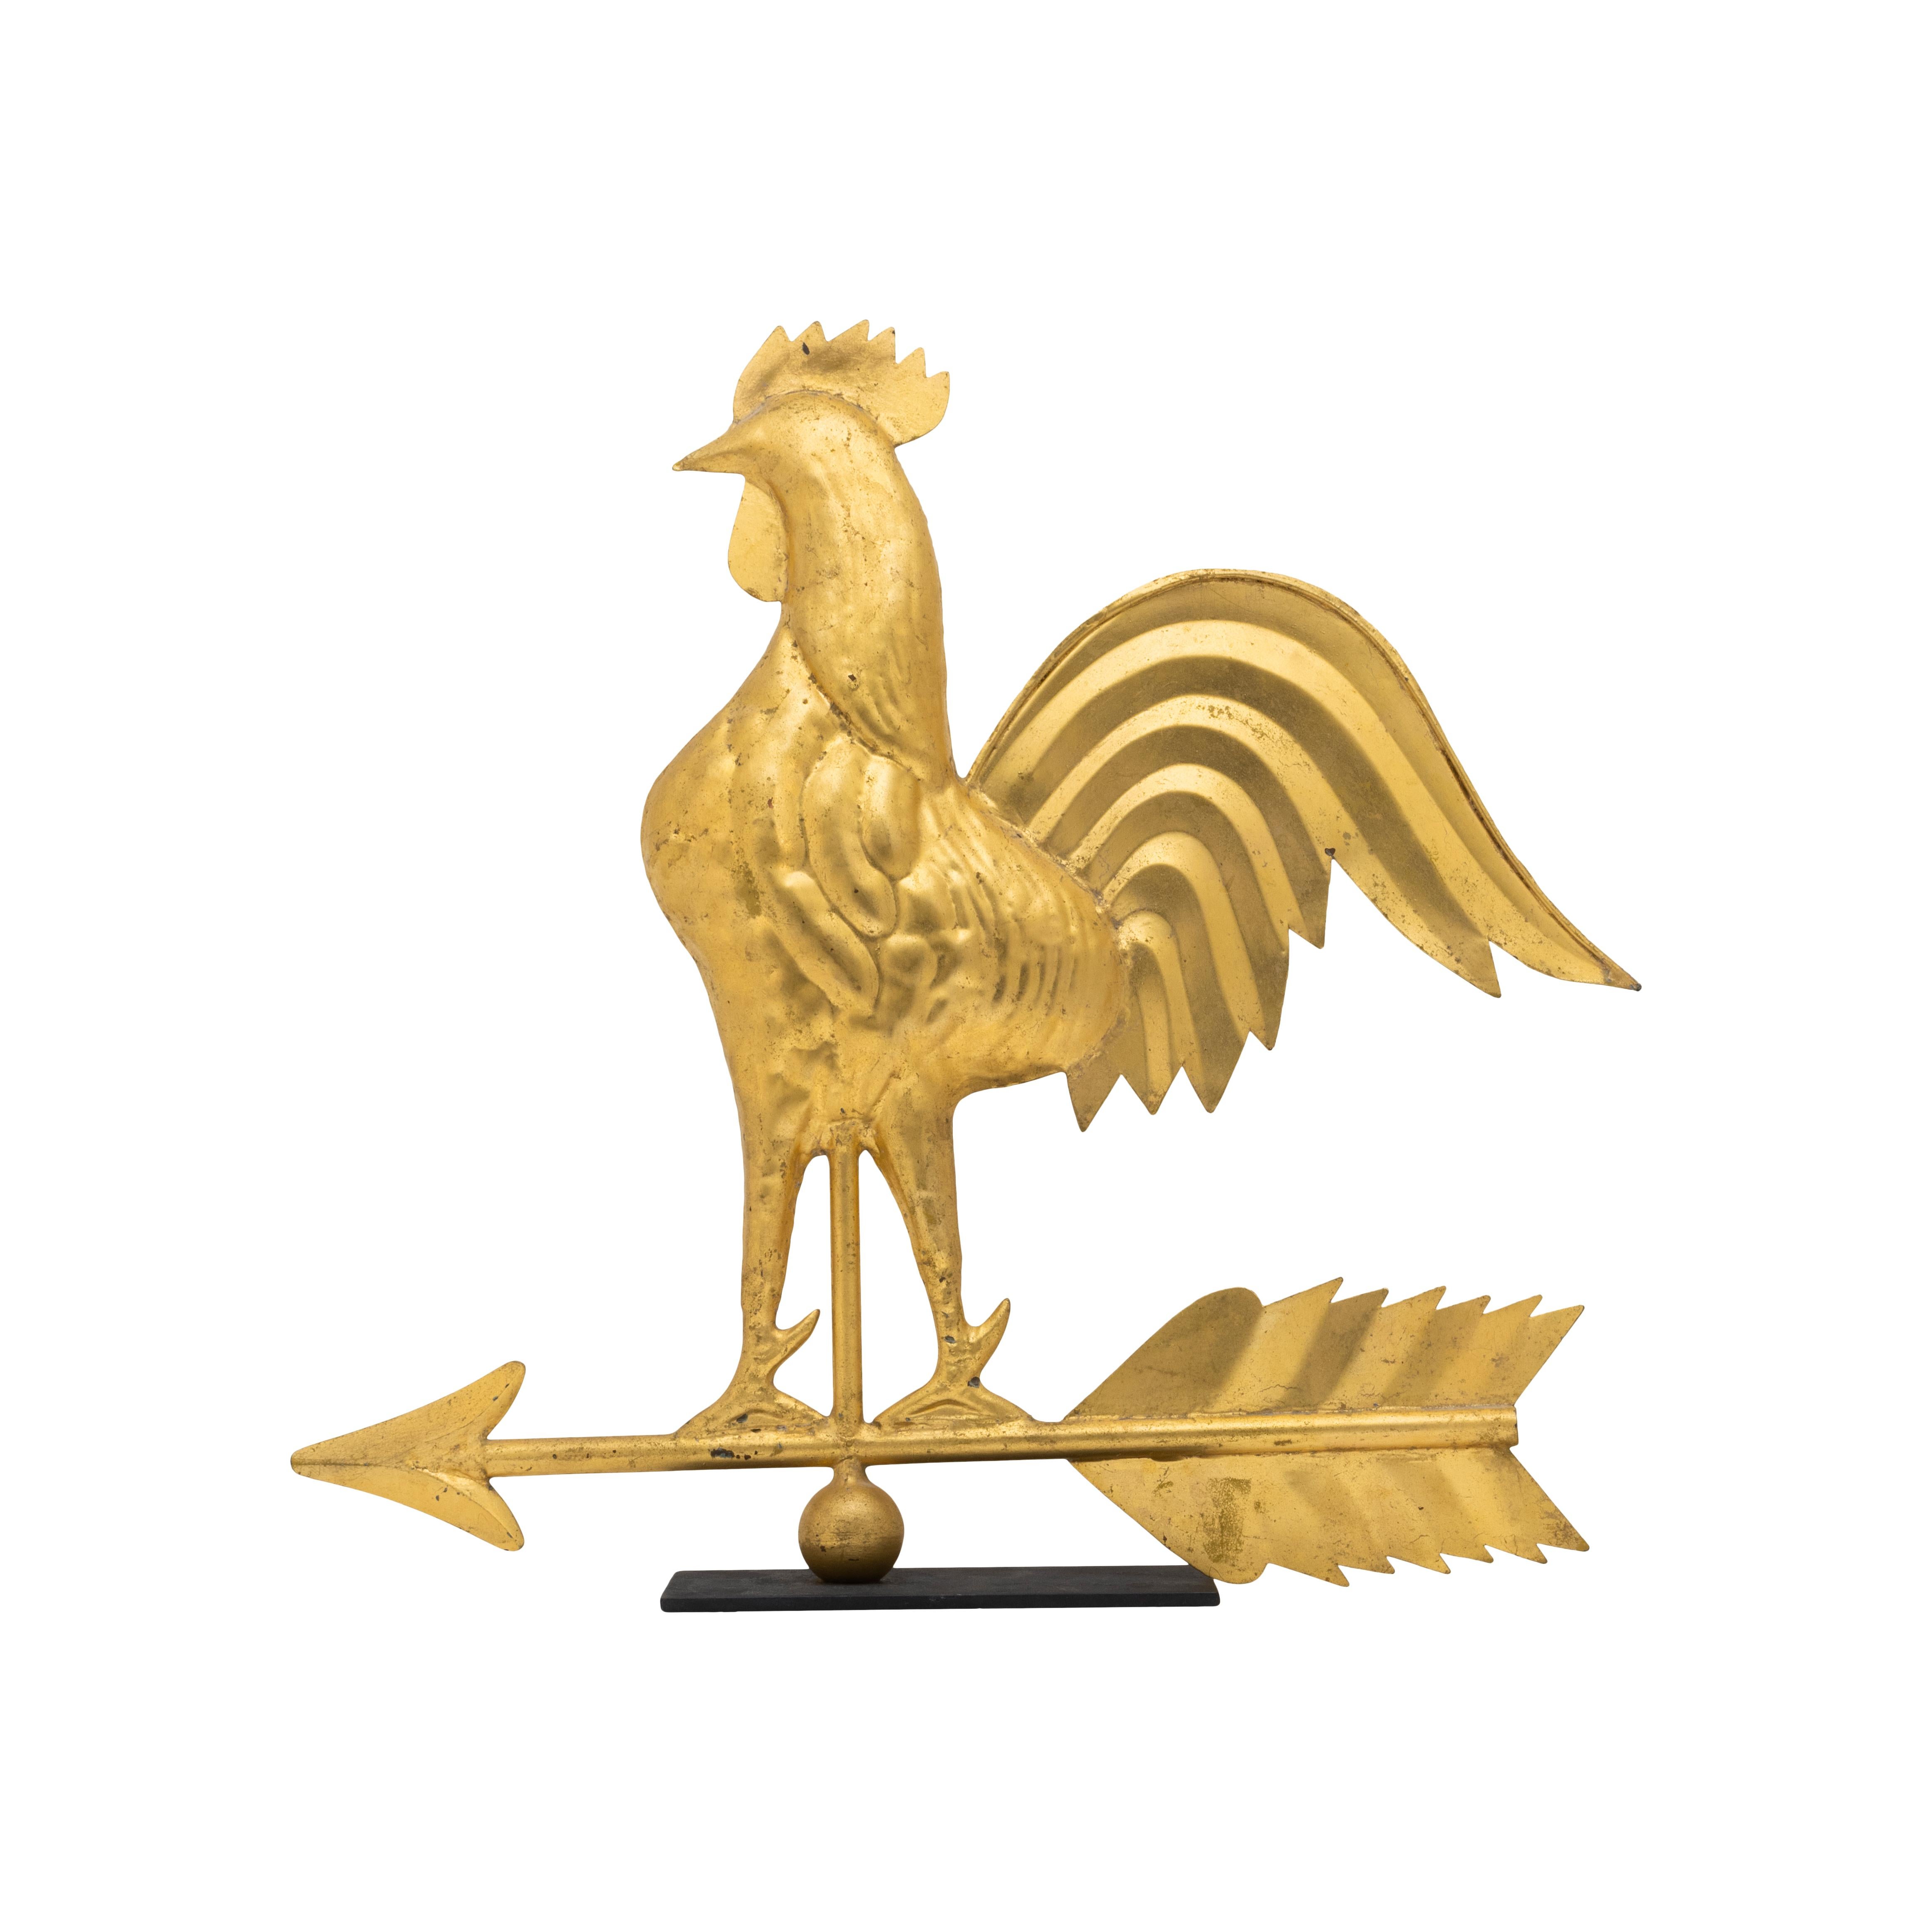 why do weather vanes have roosters